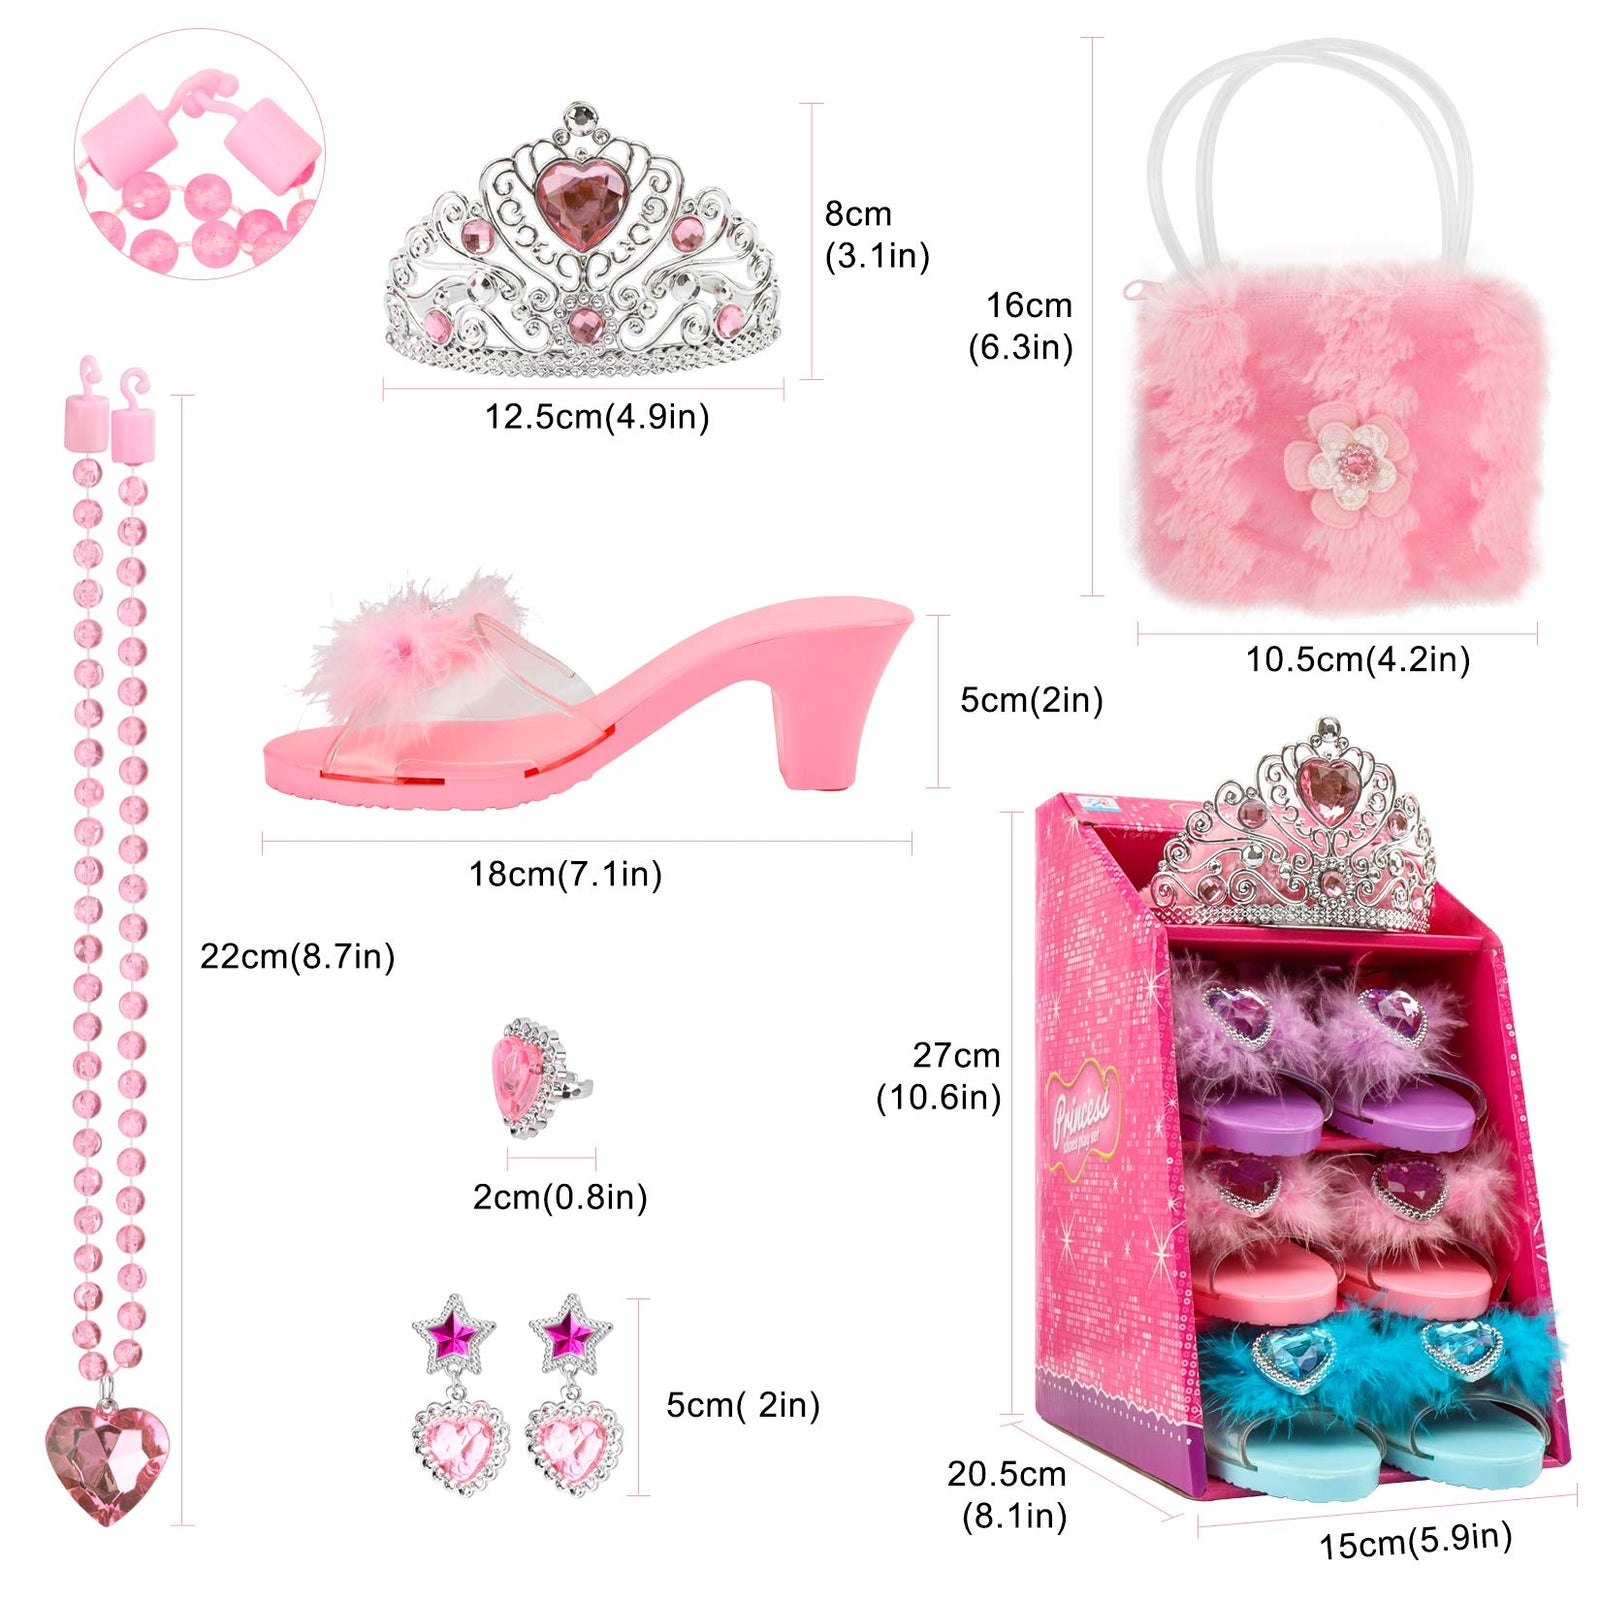 Jaolex Princess Toddler Dress Up Shoes and Pretend Jewelry Toys Set -3 Pairs of Shoes with Tiara Crown Earrings Necklaces Ring Handbag Role Play Collection Shoes Set for Girls Aged 3-6 Years Old